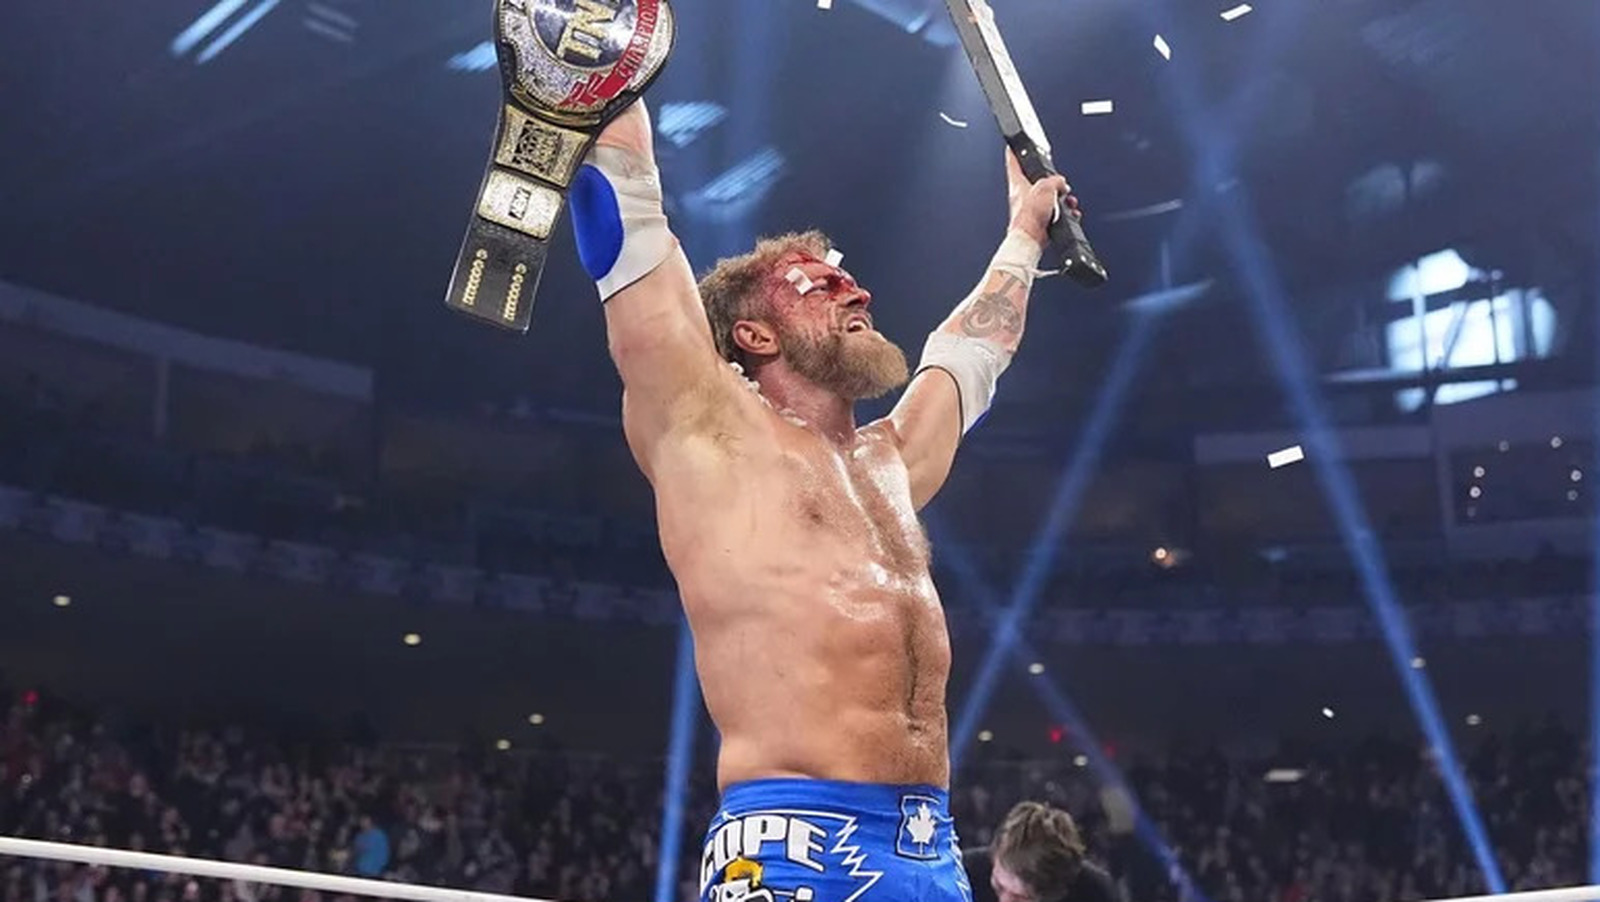 Bully Ray Weighs In On Adam Copeland Vs. Christian Cage On AEW Dynamite